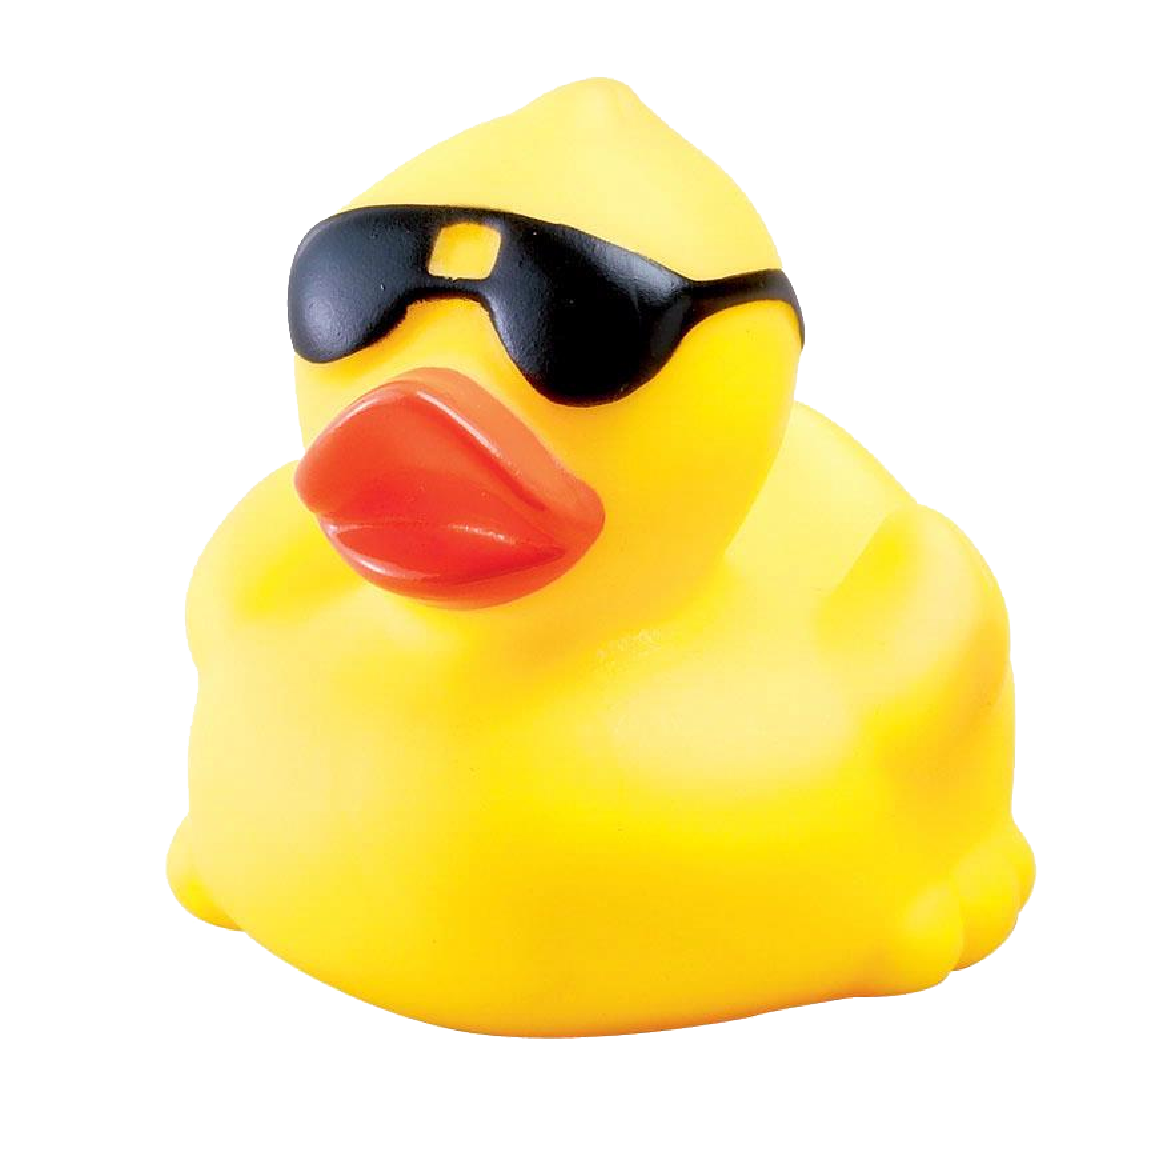 Rubber png images yellow. Ducks clipart toy duck